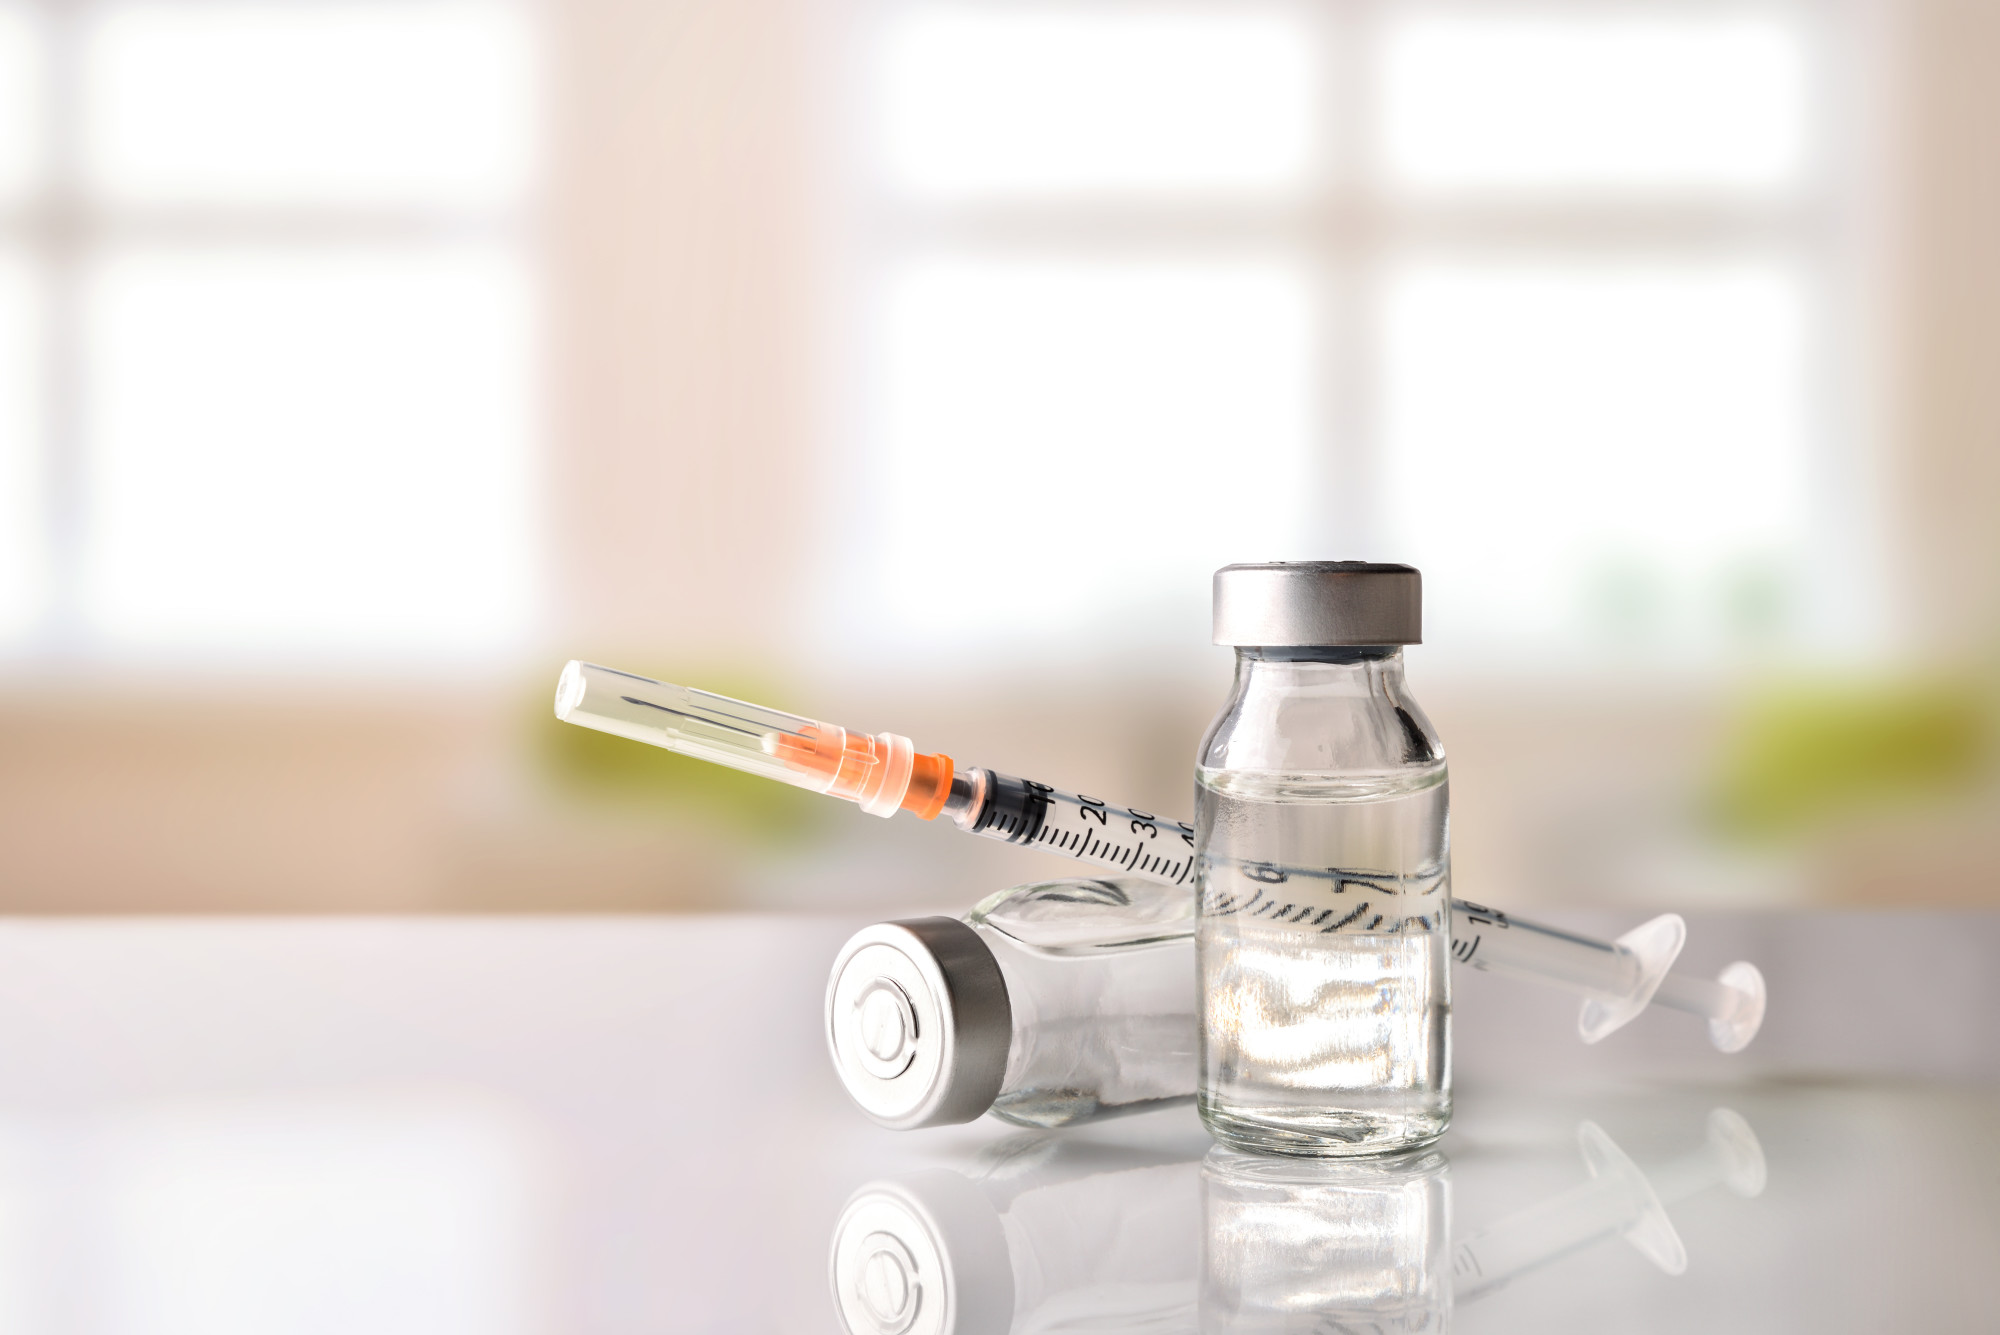 Glass vs Plastic: Which Type of Vials Should You Use?